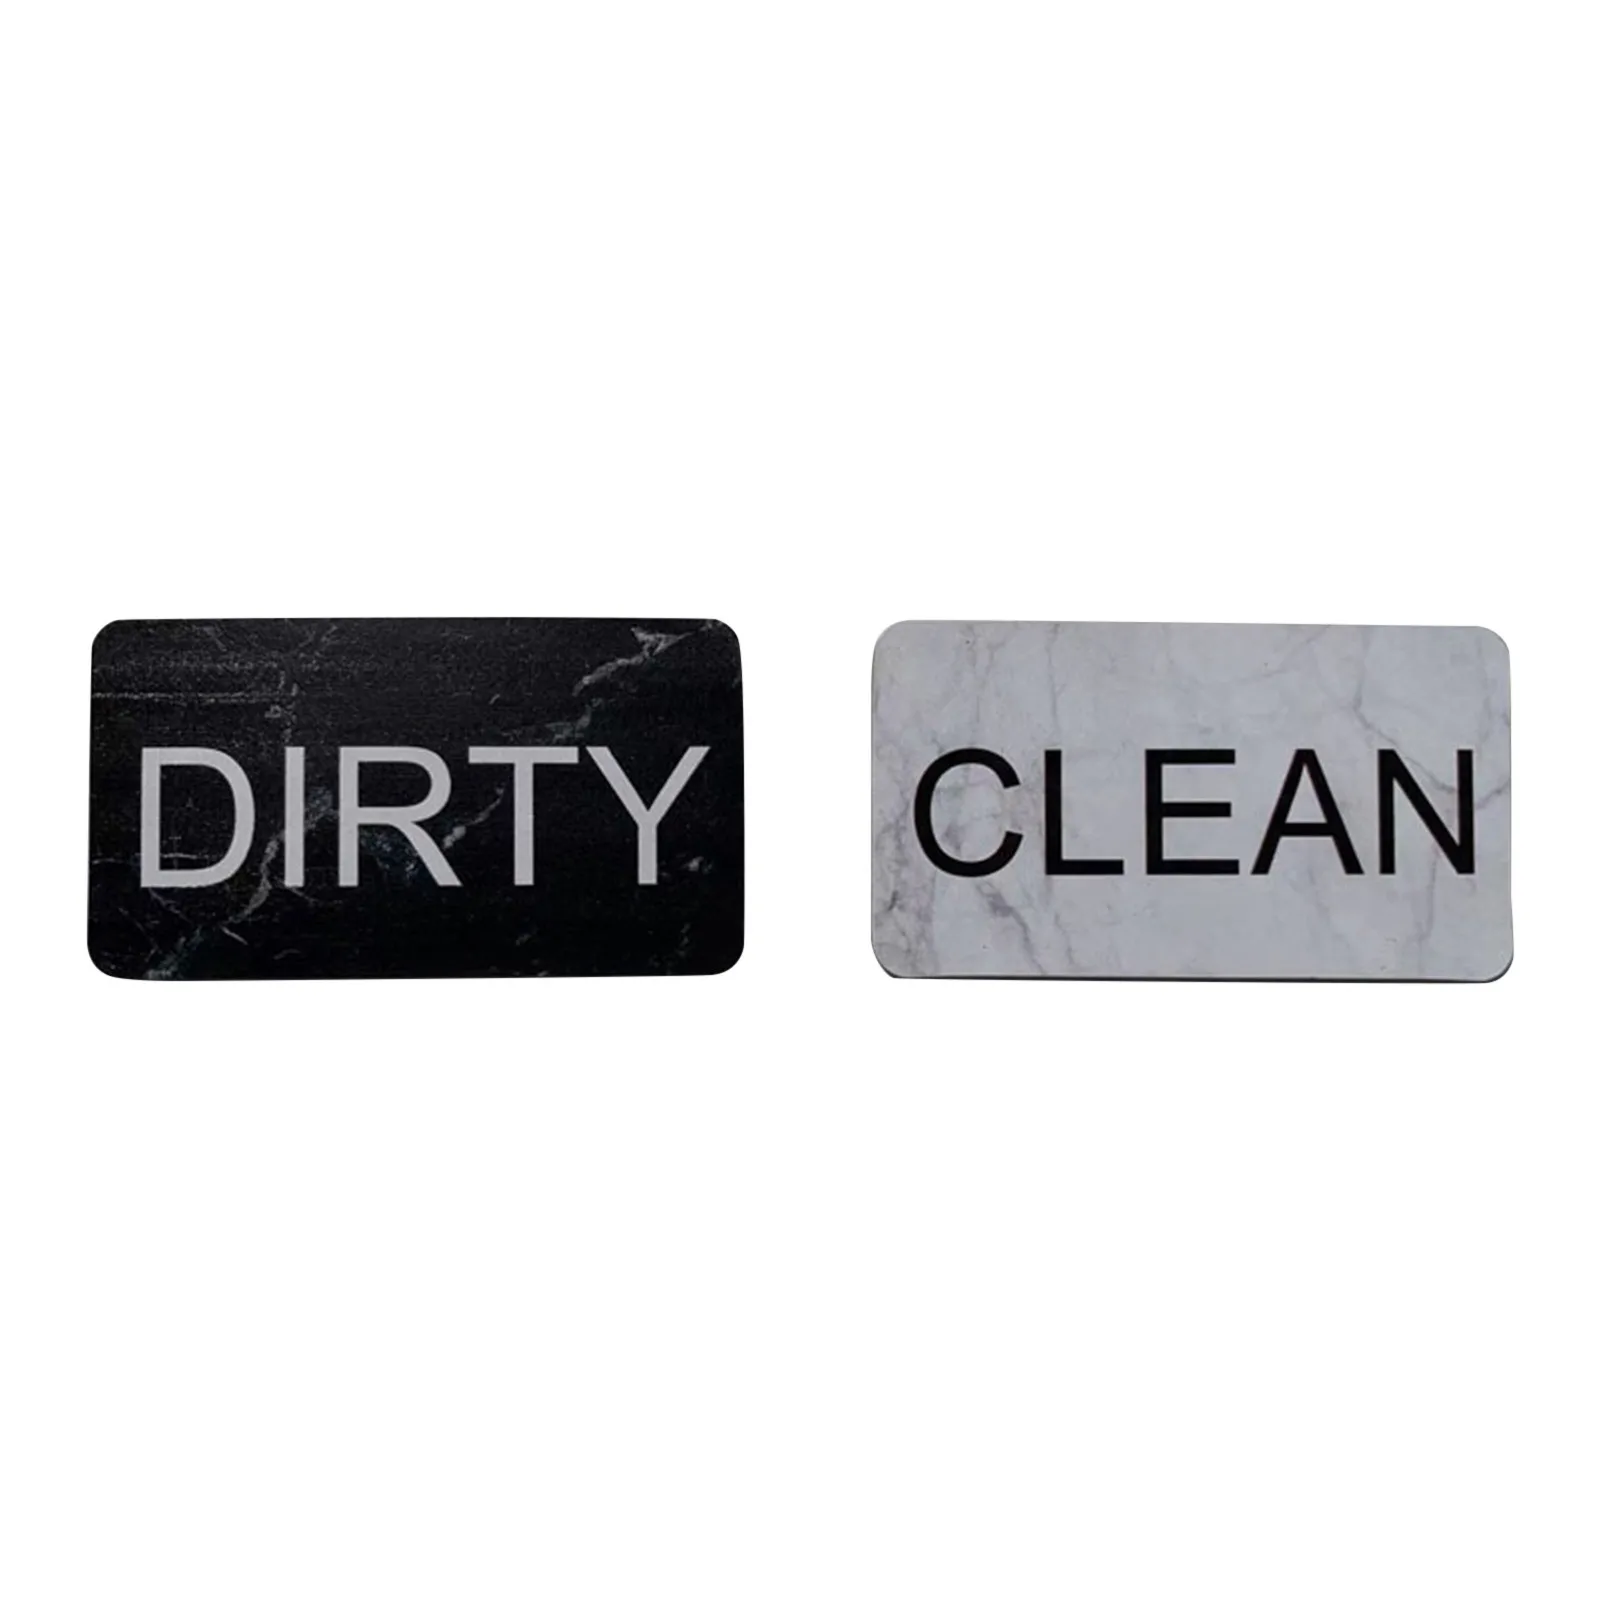 Dirty Clean Magnet Dishwasher  Dishwasher Clean Dirty Sign - Sign Kitchen  Metal Wall - Aliexpress